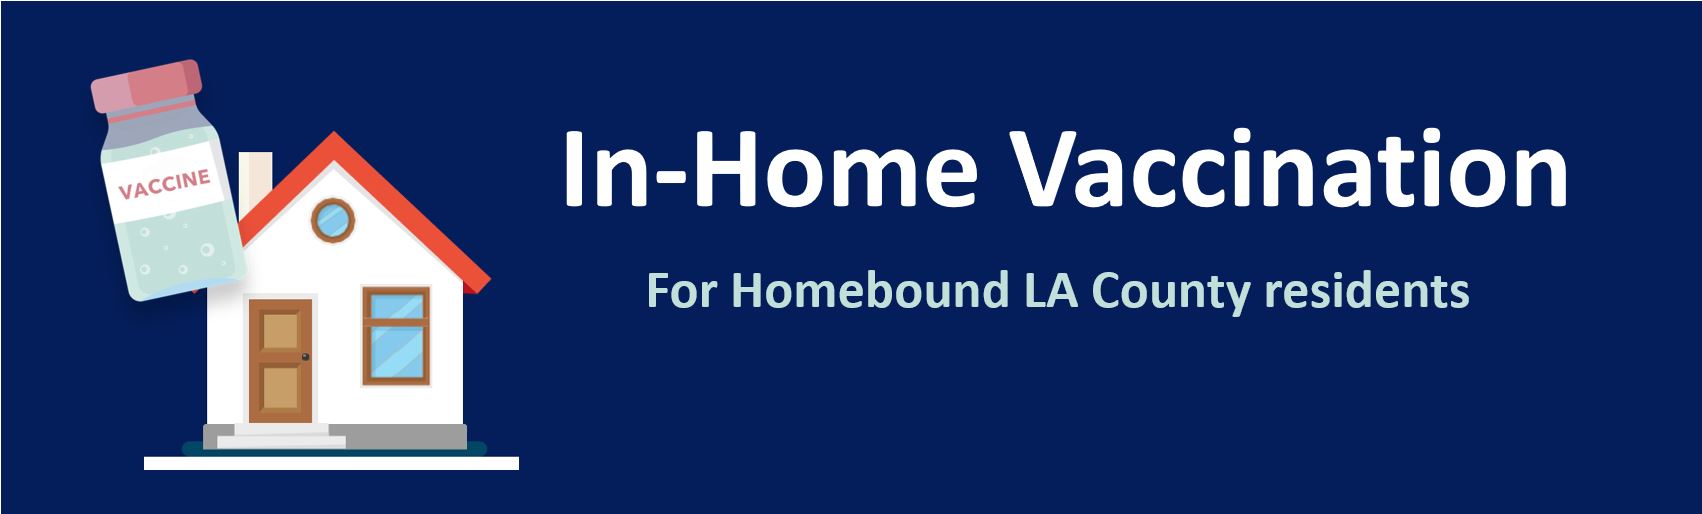 in-home vaccination banner